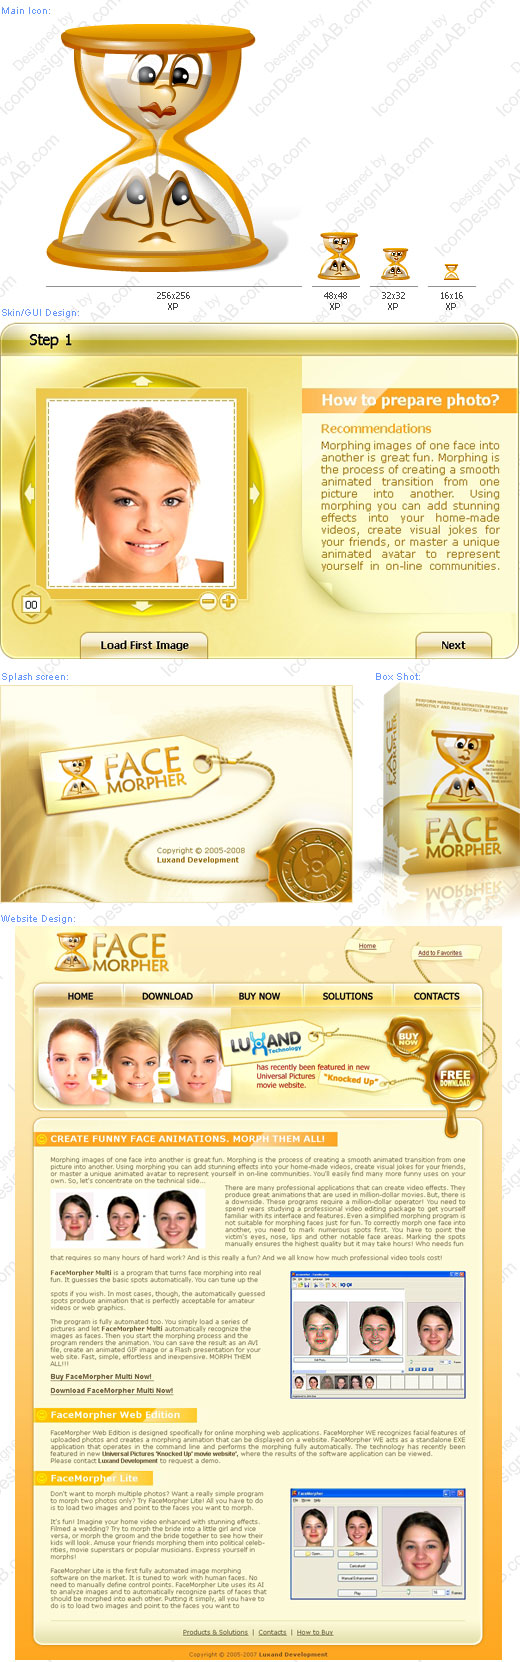 Software Identity Design for Face Morpher